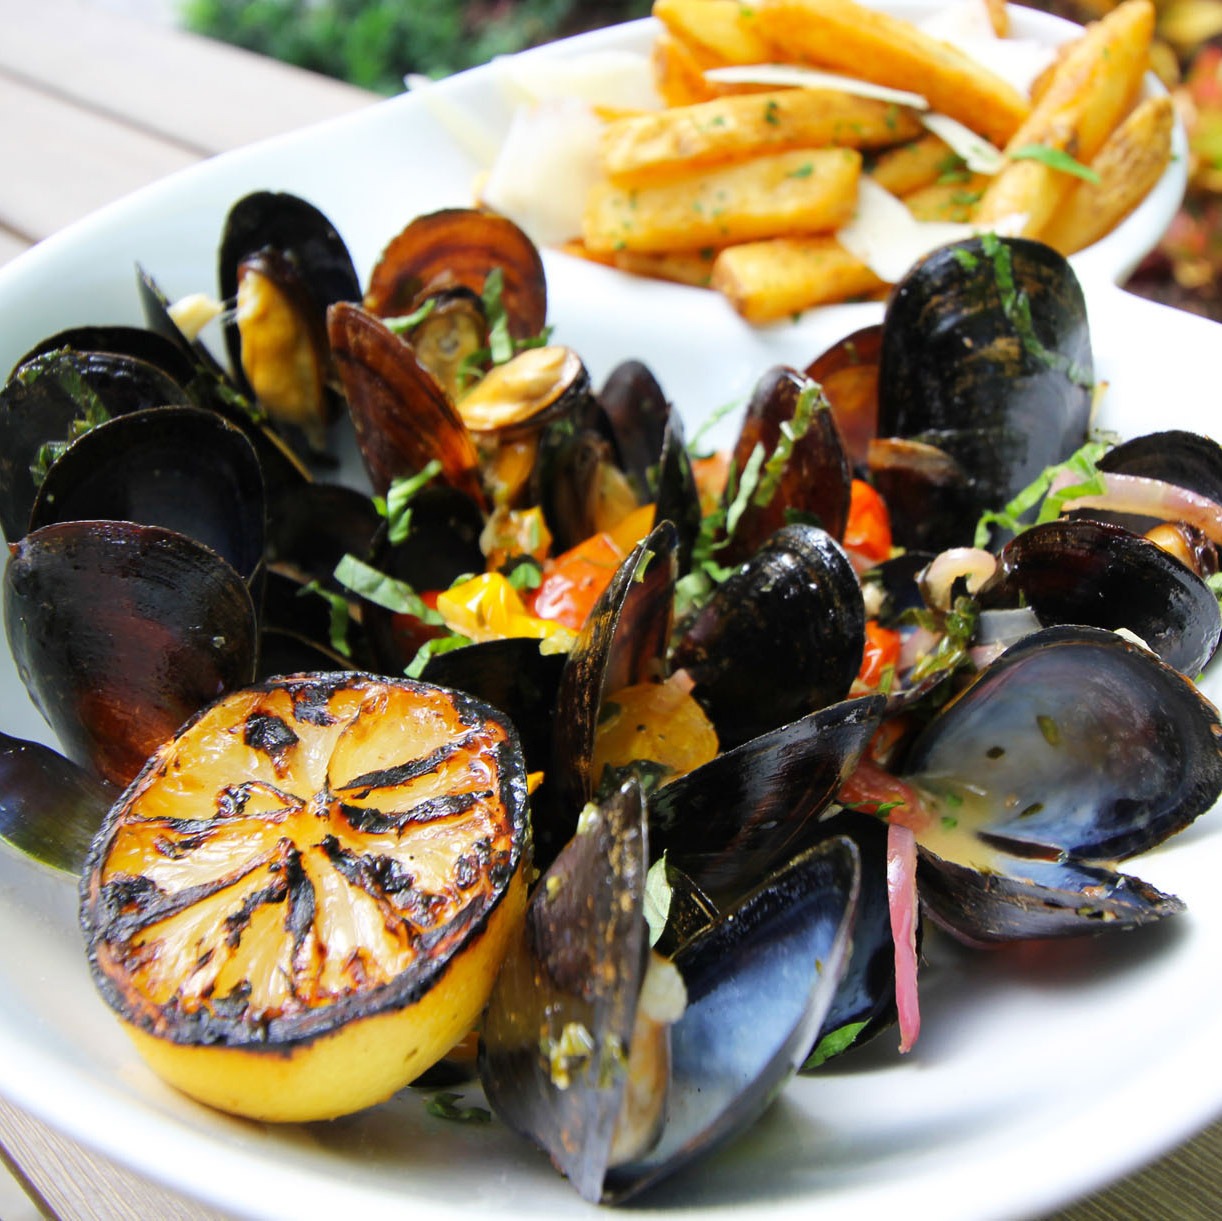 mussels french fries and lemon